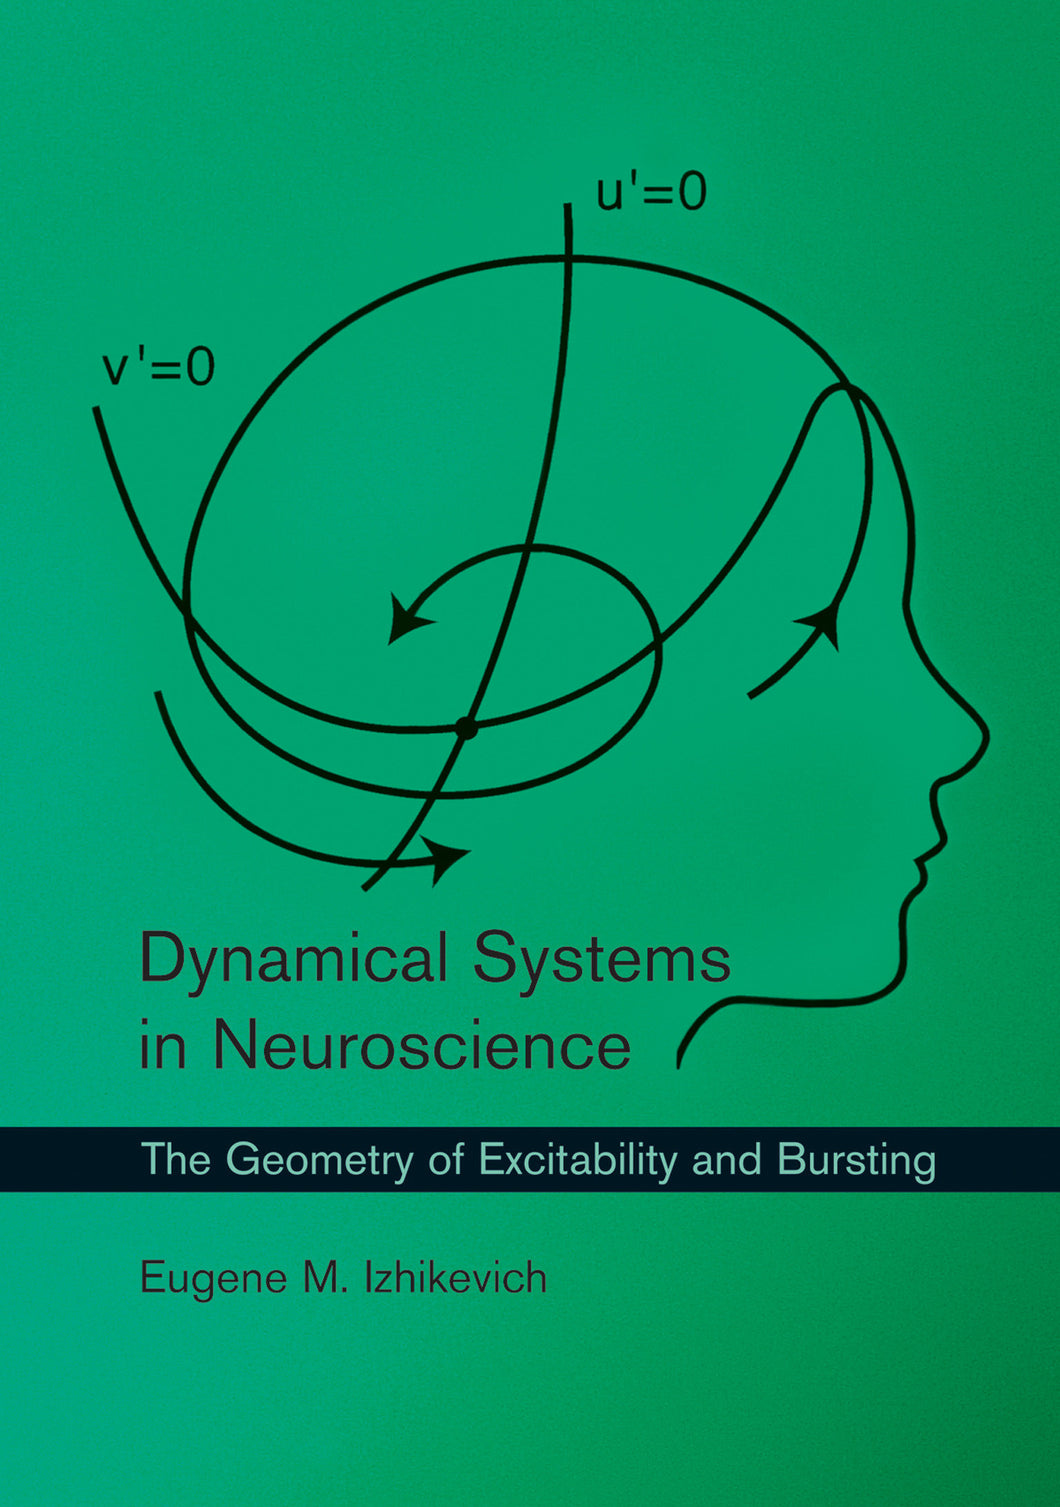 Dynamical Systems in Neuroscience: The Geometry of Excitability and Bursting